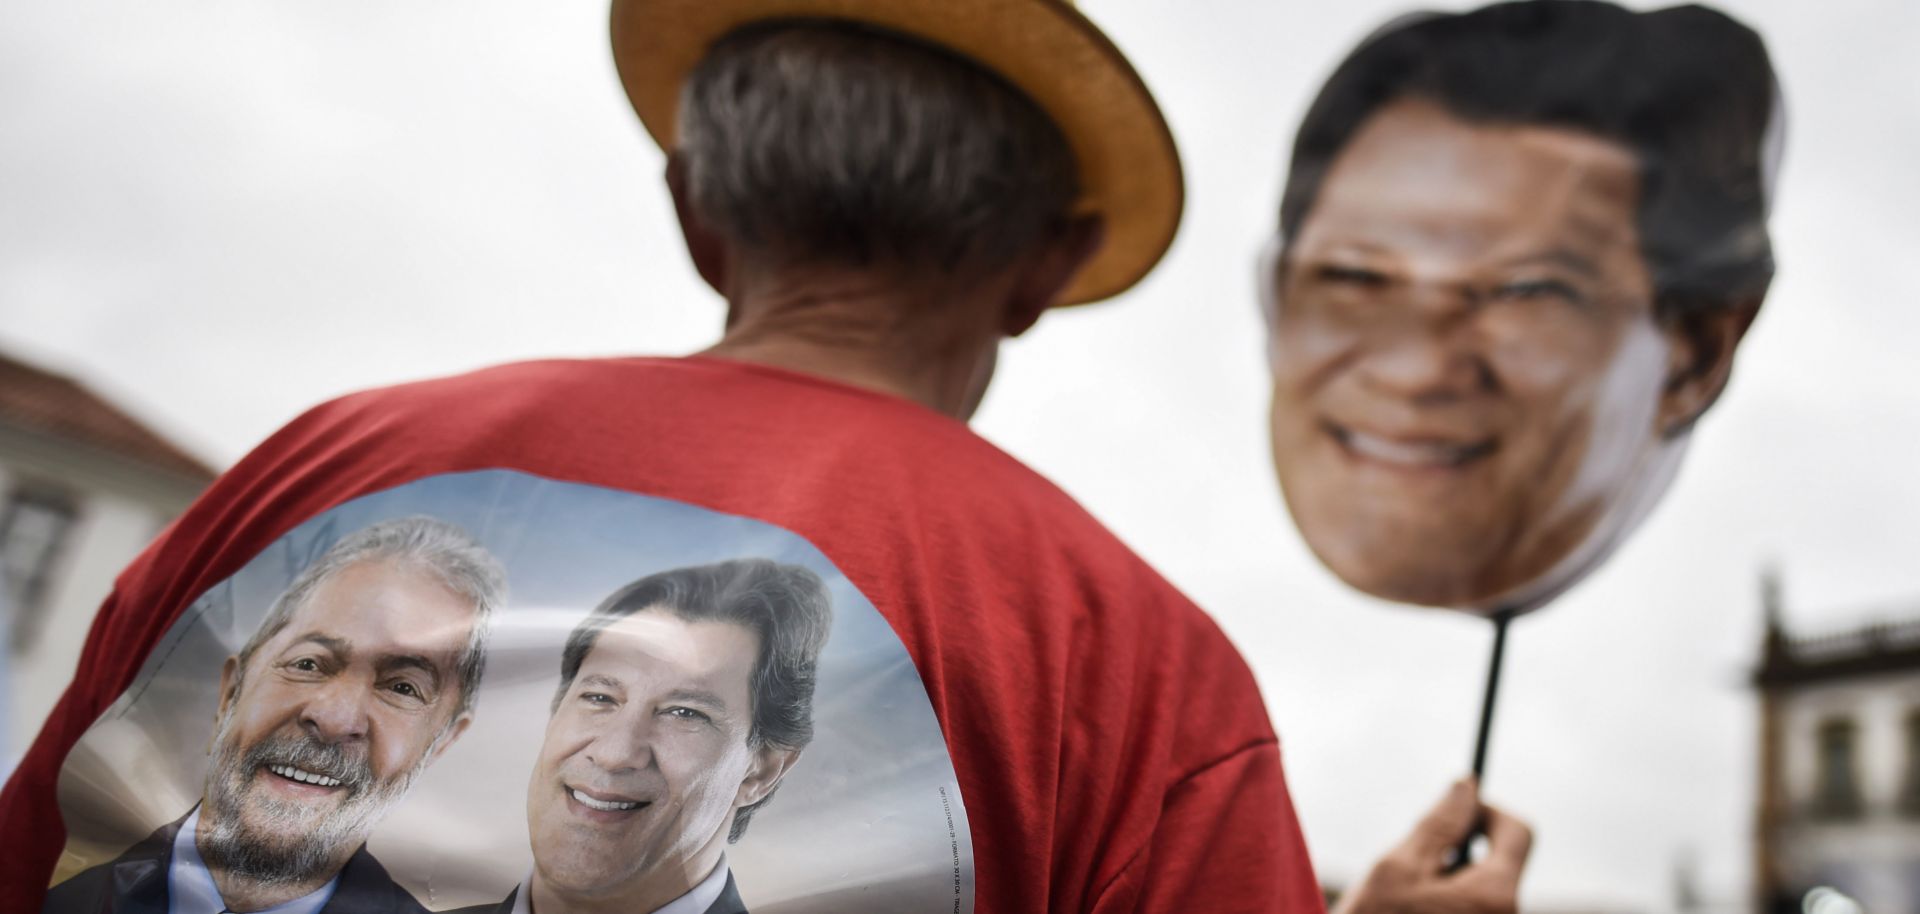 A Workers' Party supporter holds a mask with the face of Brazilian presidential candidate Fernando Haddad on it during a campaign rally in Ouro Preto, Minas Gerais, on Sept. 21 ahead of the Oct. 7 national election.